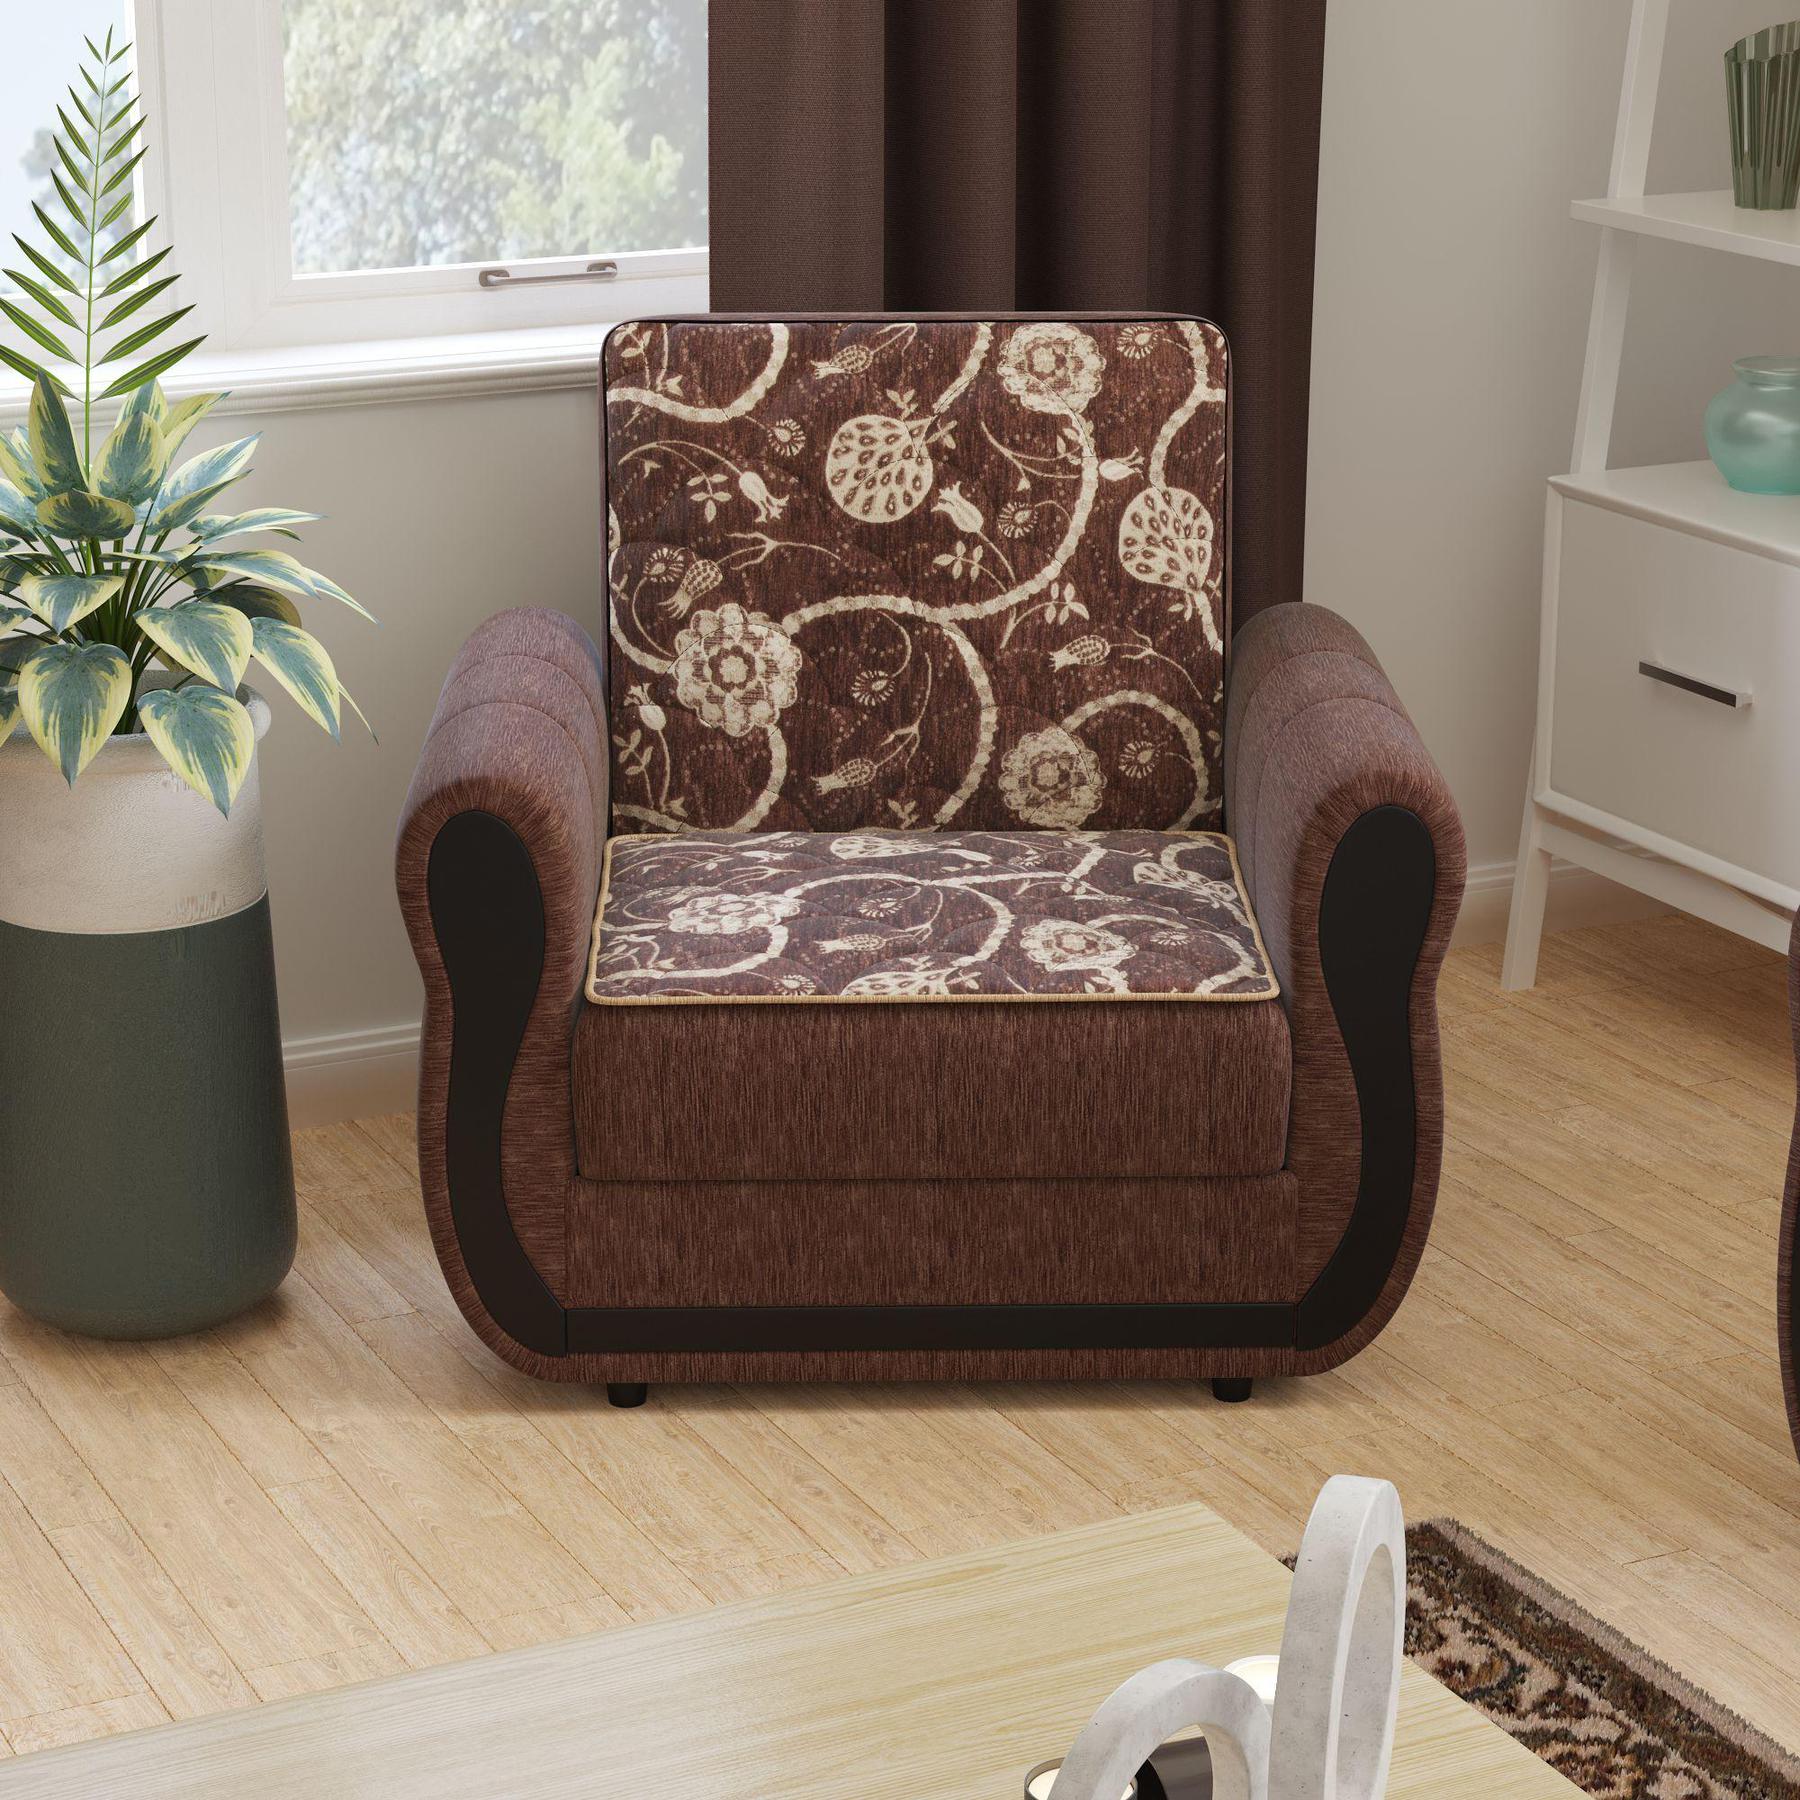 Modern design, Royal Brown , Chenille upholstered convertible Armchair with underseat storage from Victoria Urban by Ottomanson in living room lifestyle setting by itself. This Armchair measures 39 inches width by 28 inches depth by 38 inches height.